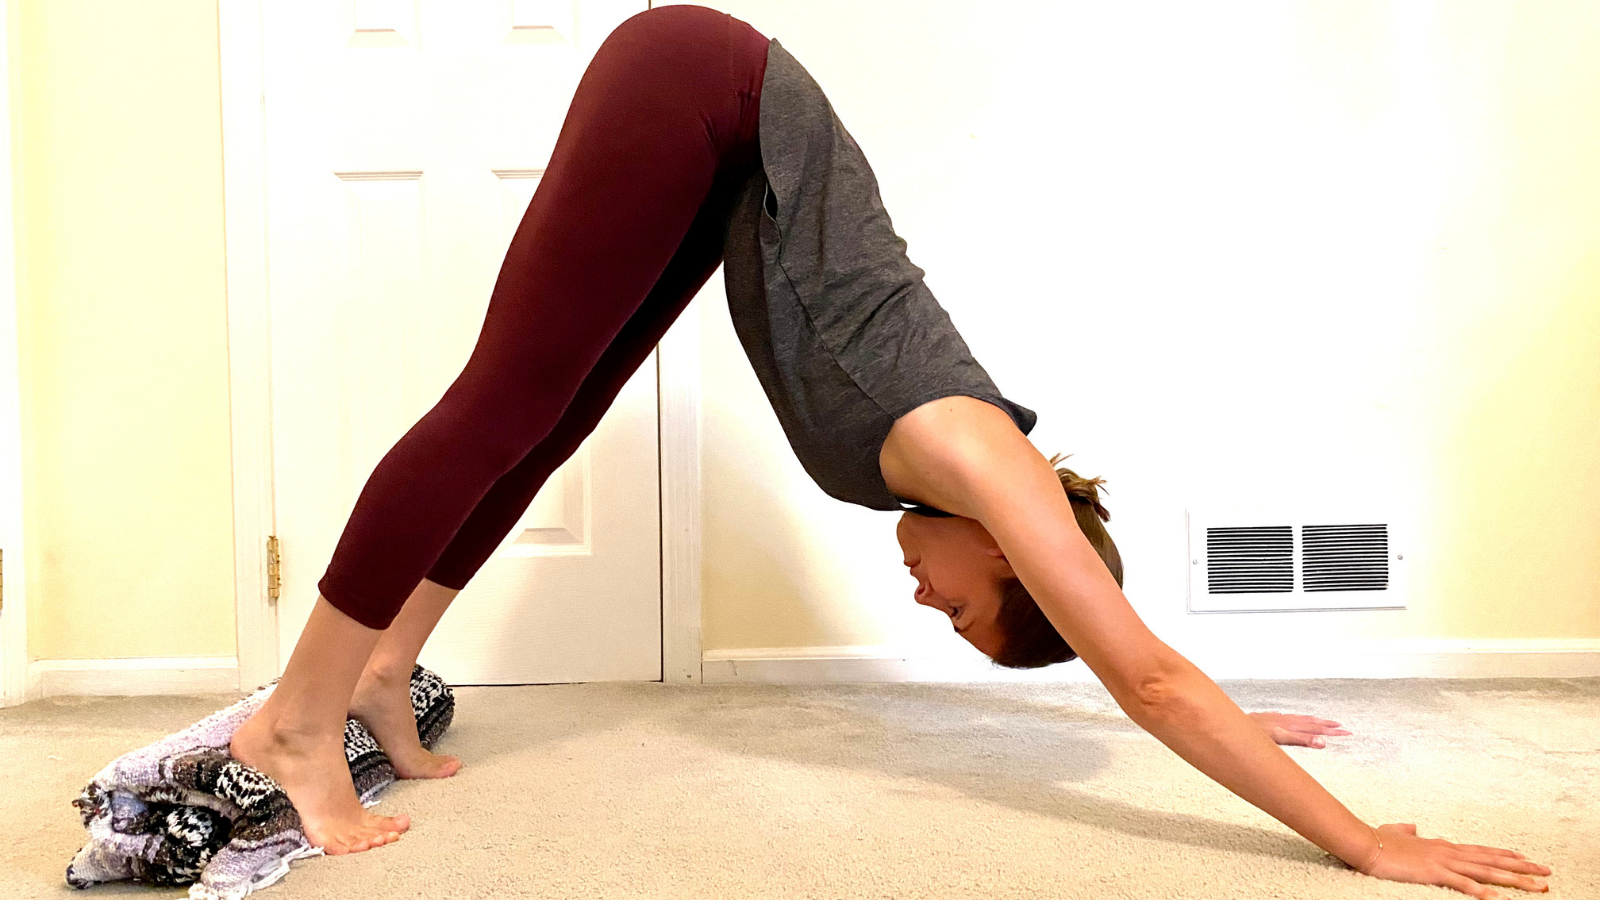 A comfortable version of Downward Facing Dog or Adho Mukha Svanasana placing a blanket under your heels to create greater comfort in the legs and feet